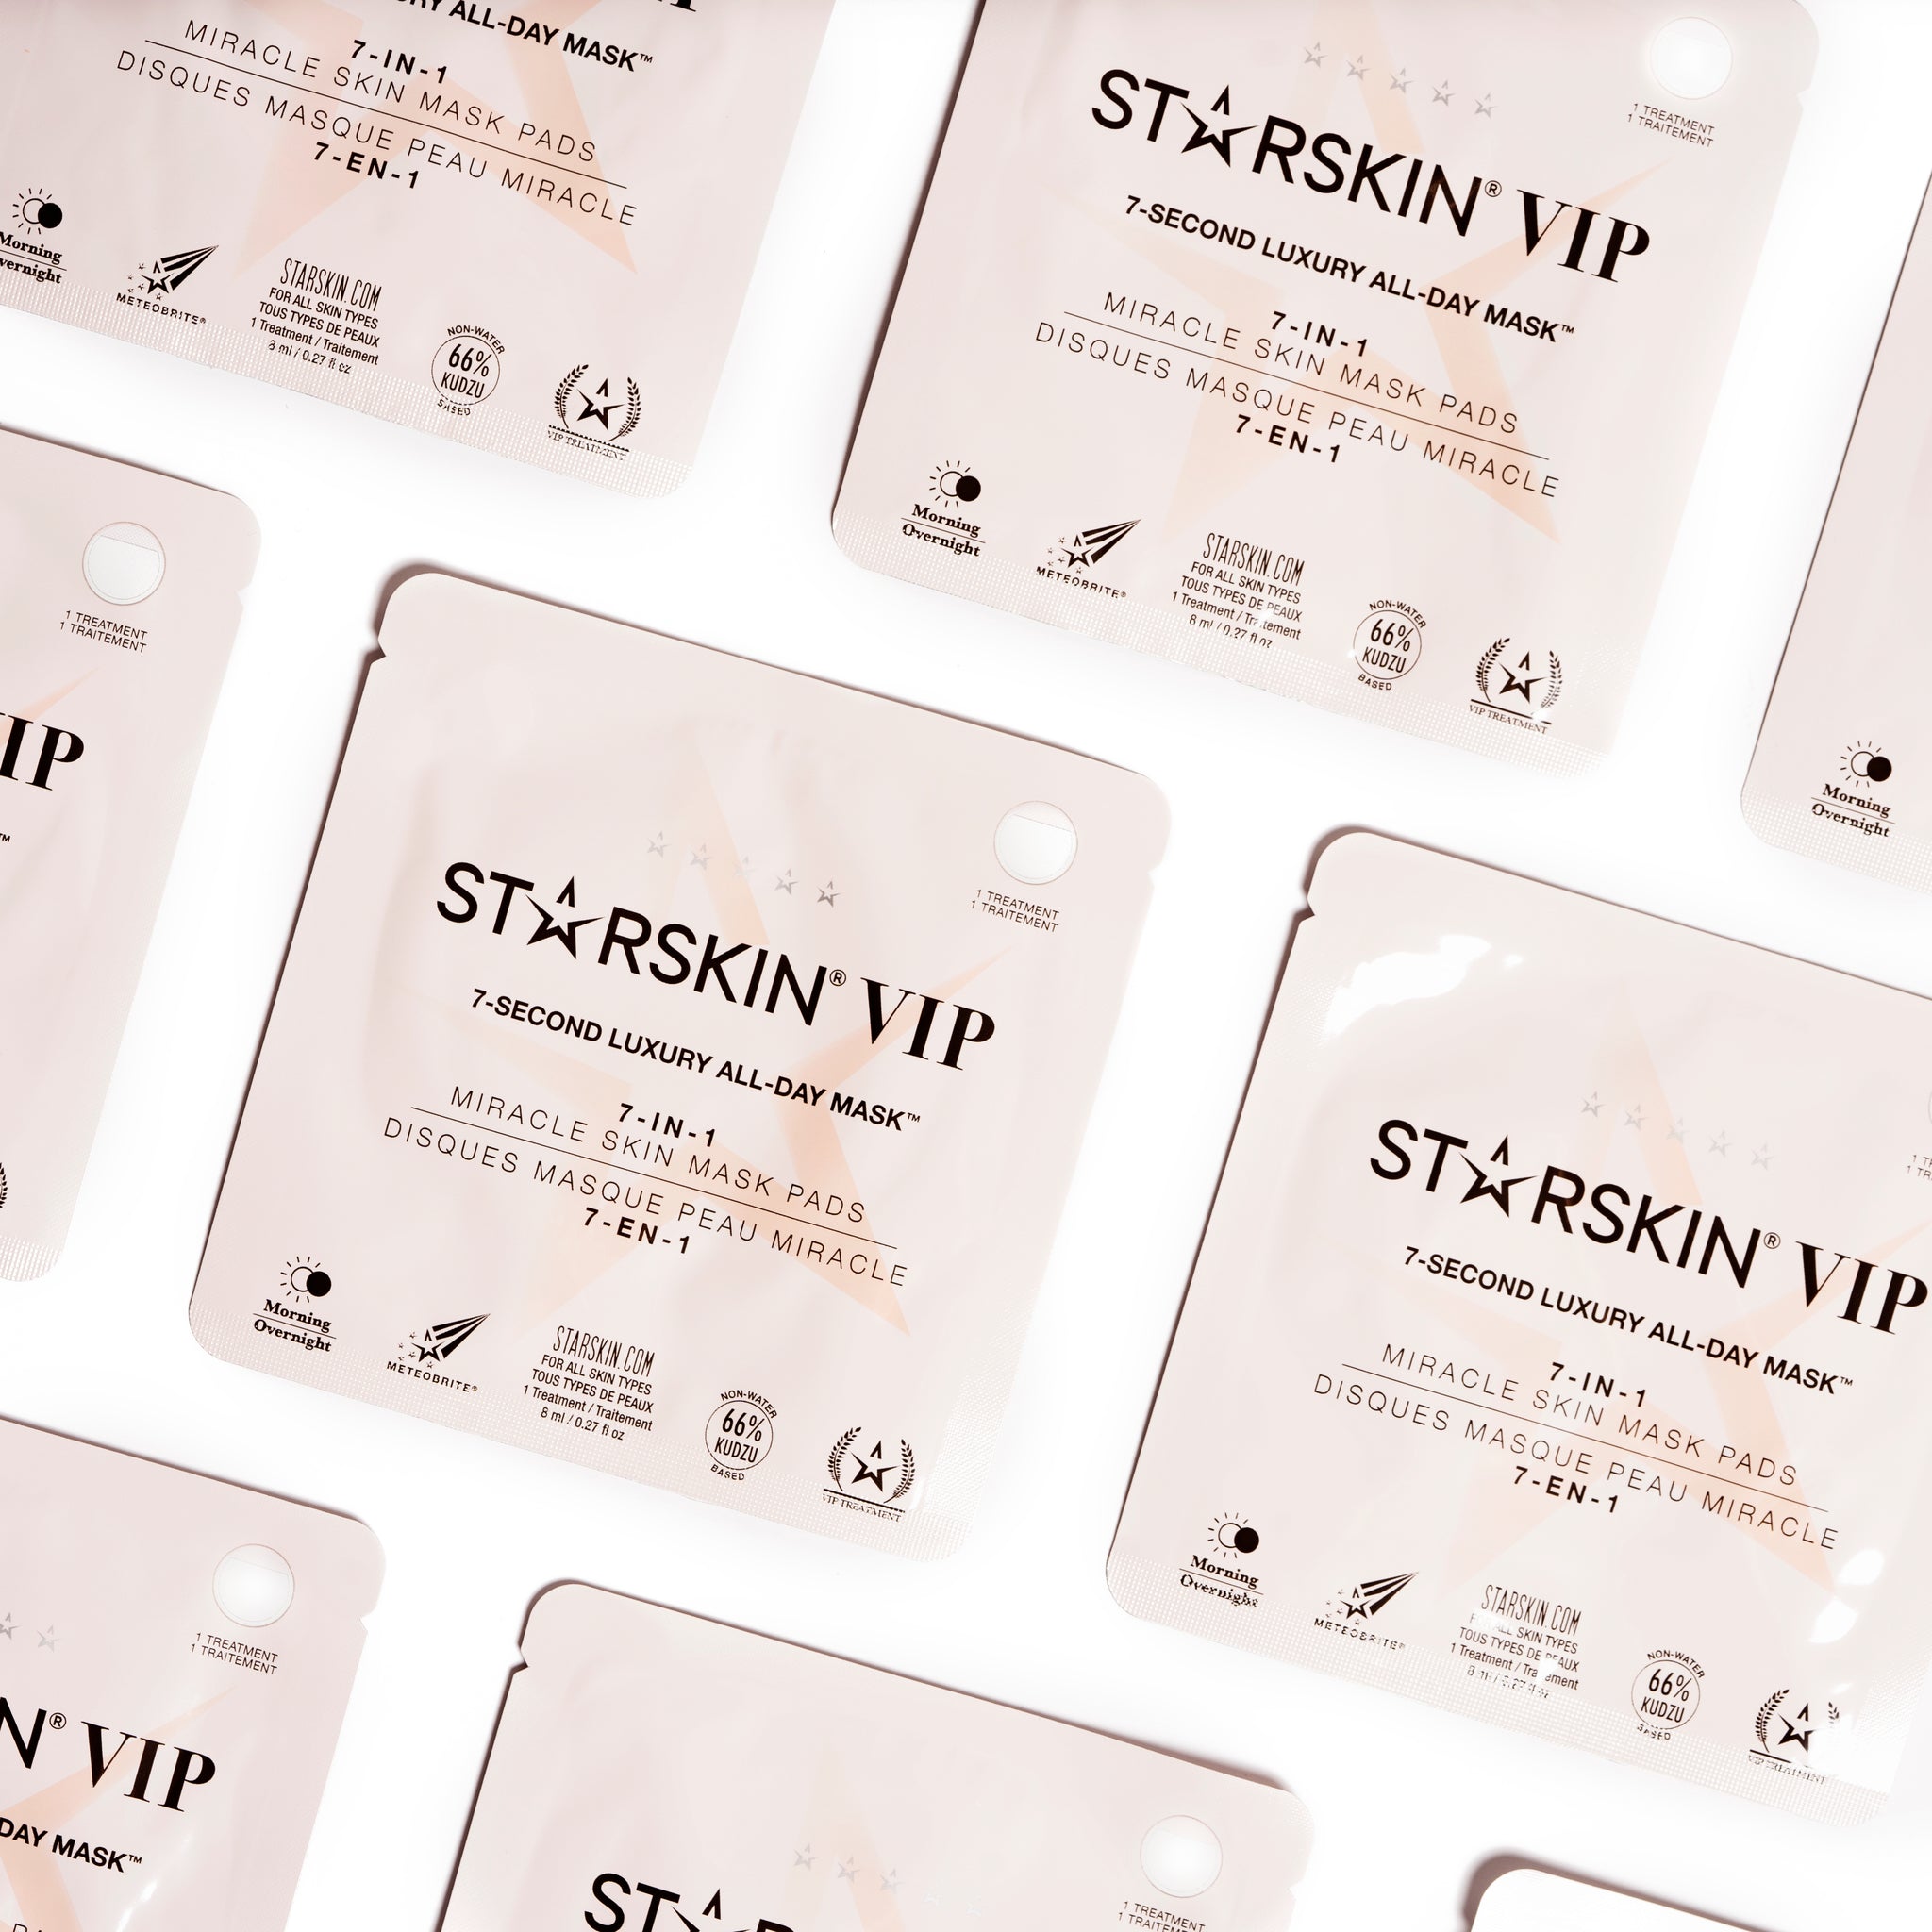 The individual sachets of the starskin 7 second mask. They are all being displayed next to each other in a similar order. 